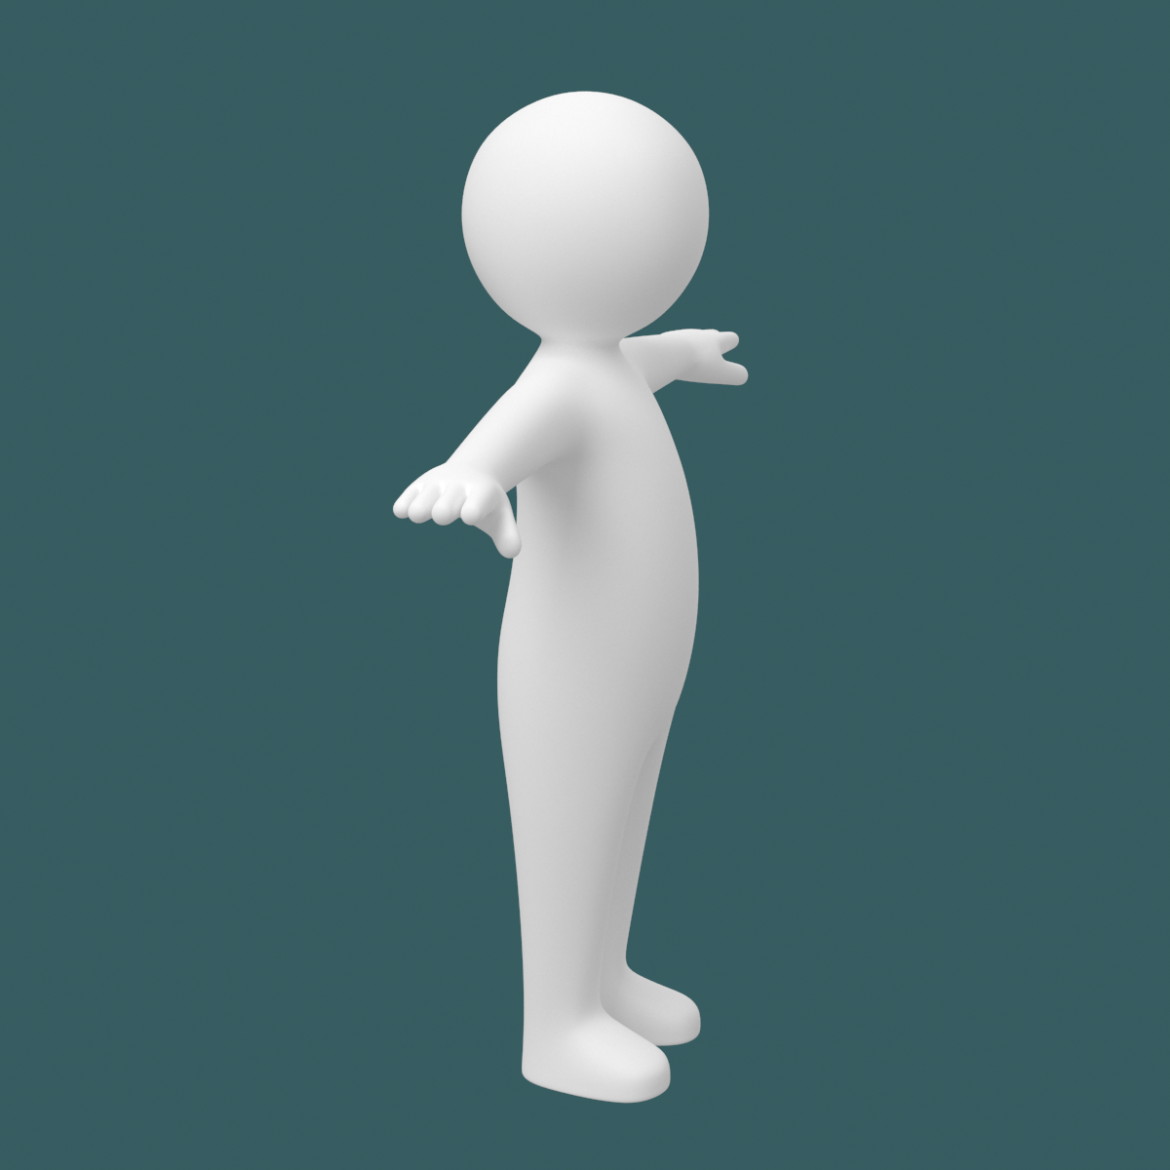  <a class="continue" href="https://www.flatpyramid.com/3d-models/characters-3d-models/human-types/toddler-baby-child-stickman-in-t-pose/">Continue Reading<span> Toddler Baby Child Stickman in T-Pose</span></a>